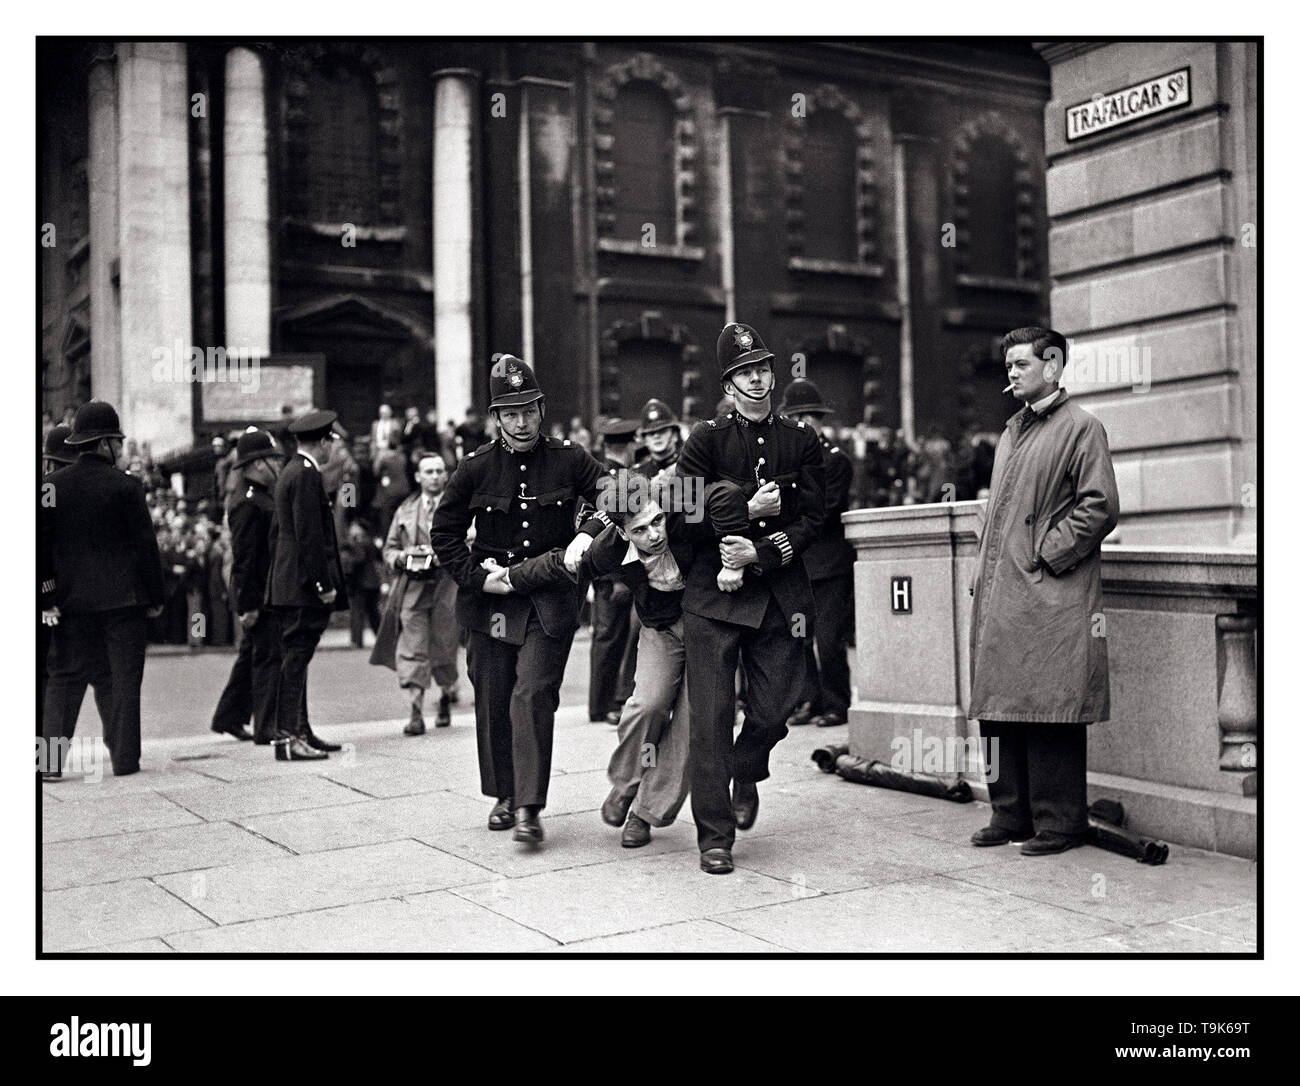 Vintage B&W news image of demonstrator struggling with police as the British Union of Fascists from Kentish Town, led by Sir Oswald Mosley parade and march in London during local elections Sunday July 4, 1937 Trafalgar Square London UK Stock Photo